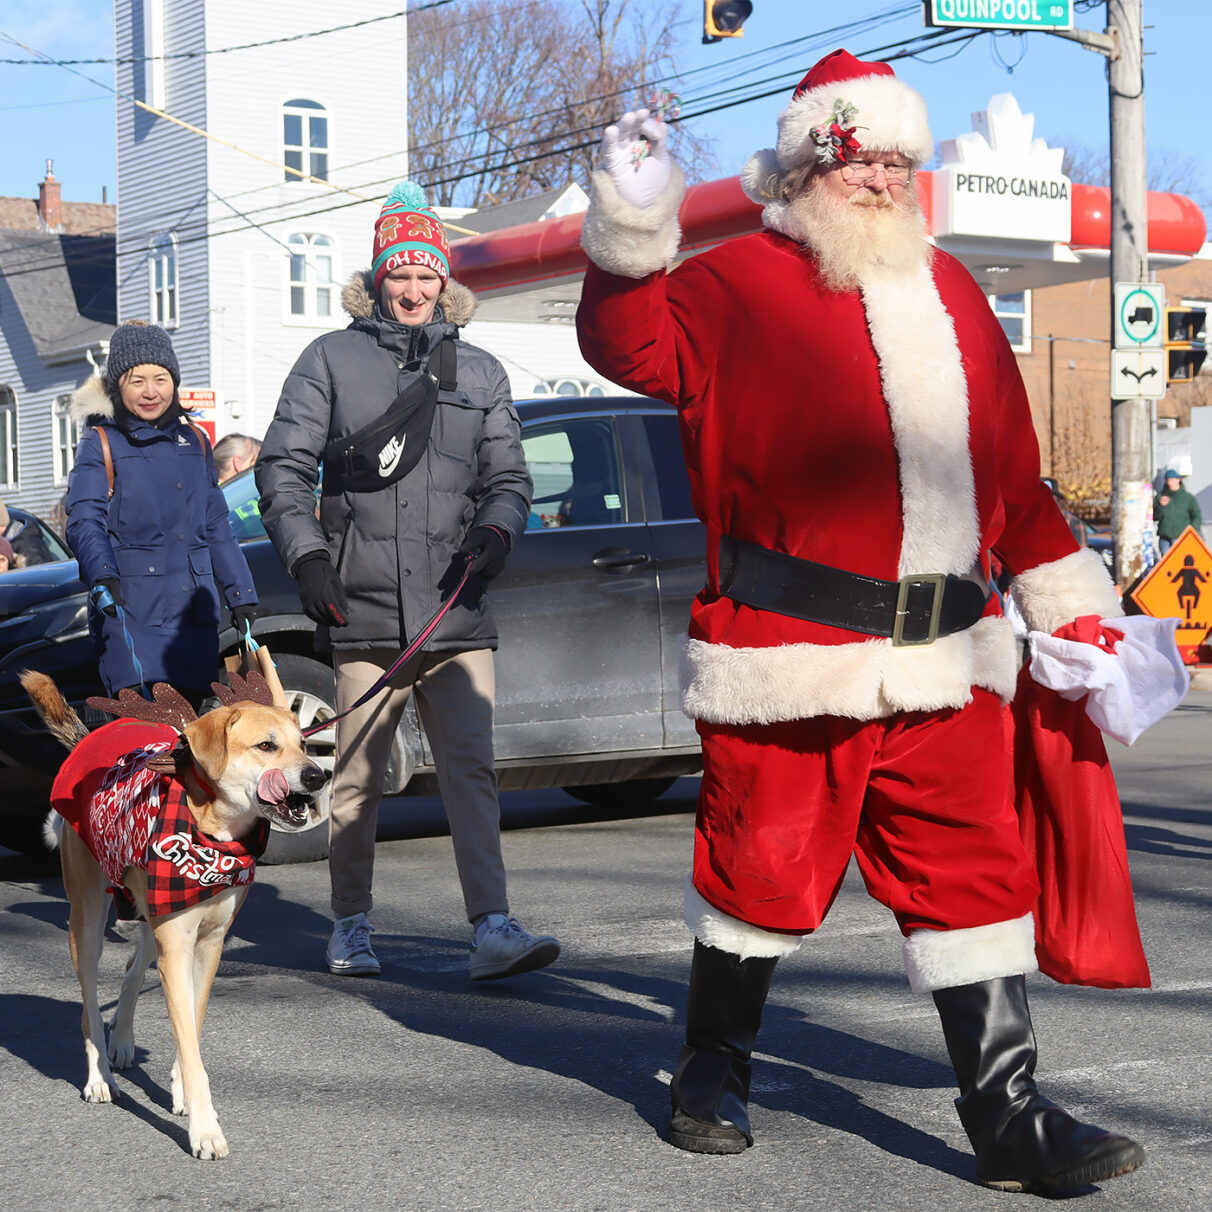 Santa crosses the street holding candy canes in his hand as he waves. A man and woman walk behind Santa. The man walks his dog who wears a red coat and bandana with reindeer antlers.